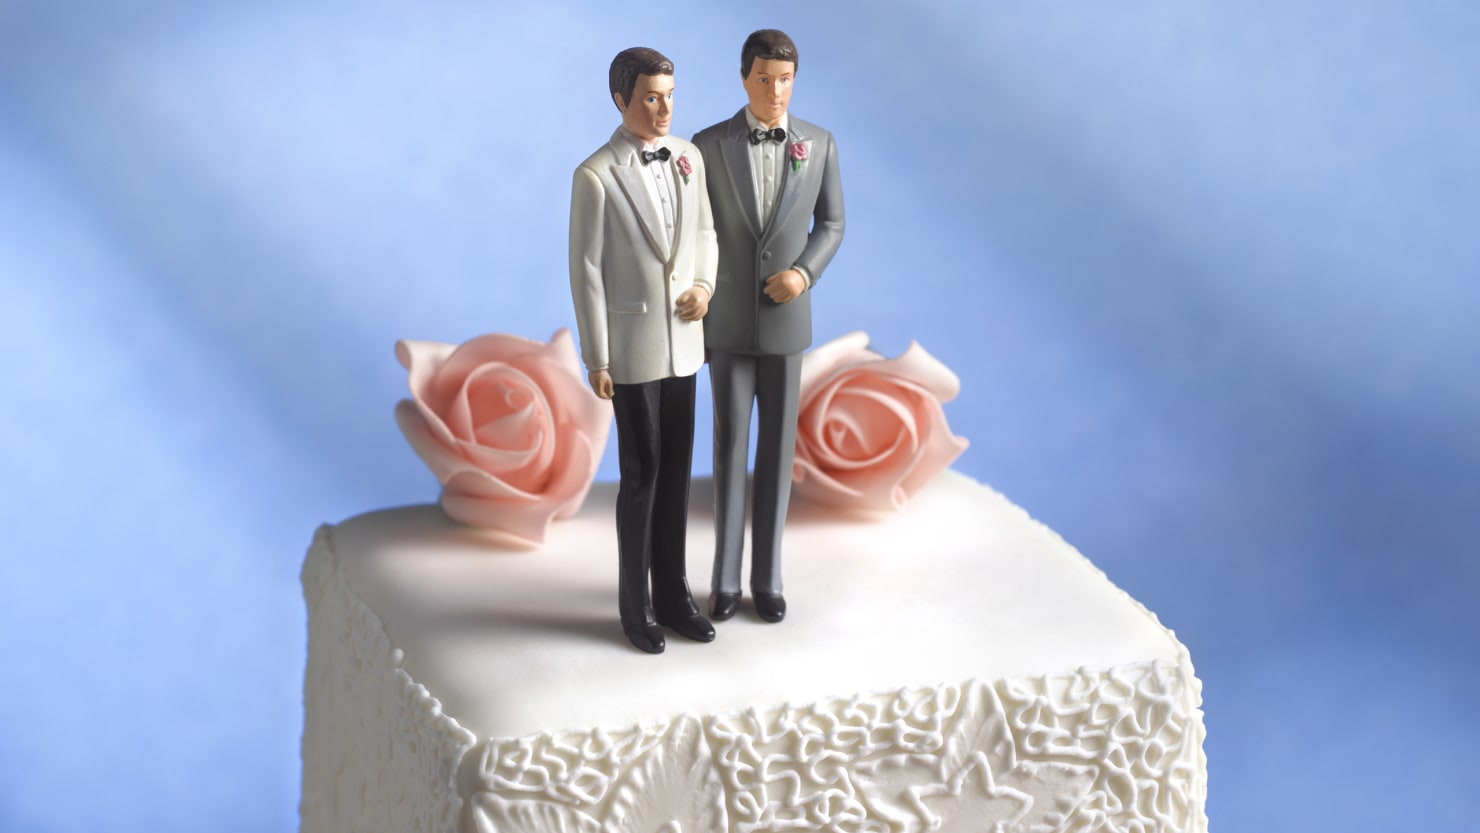 171204-michaelson-gay-marriage-cake-tease_sioghu